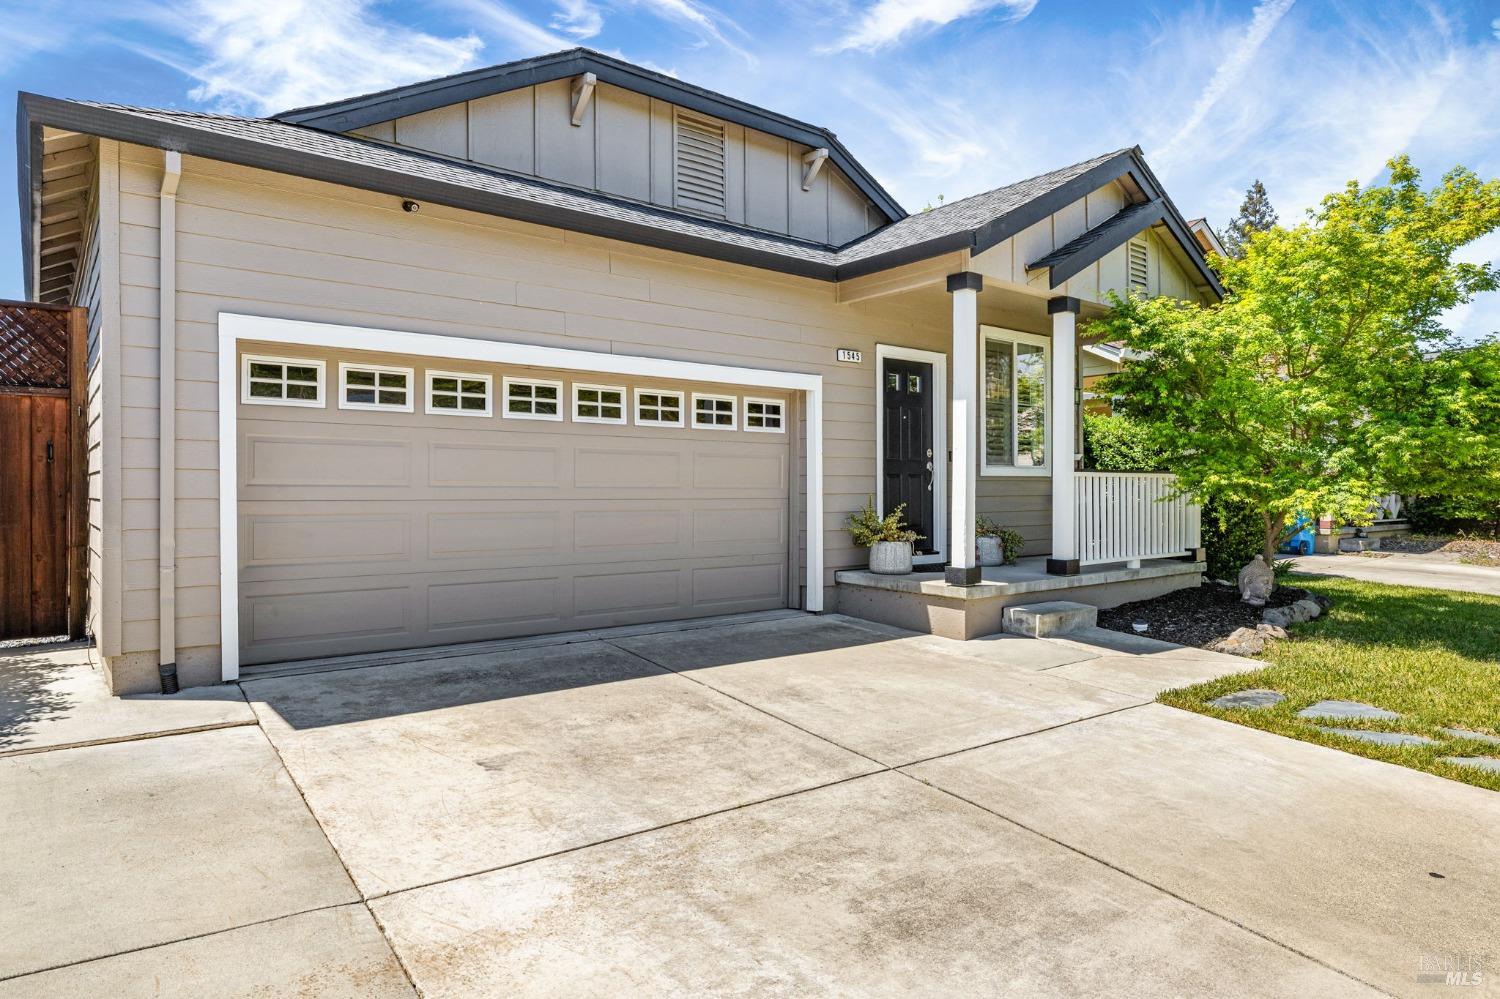 Welcome to 1545 Gamay St. with a 2-car garage. Be prepared to be impressed with what this single-story home in Northwest Santa Rosa has to offer! This home has approx. 1910 sq. ft. with 3 bedrooms & 2 bathrooms (including the primary suite).